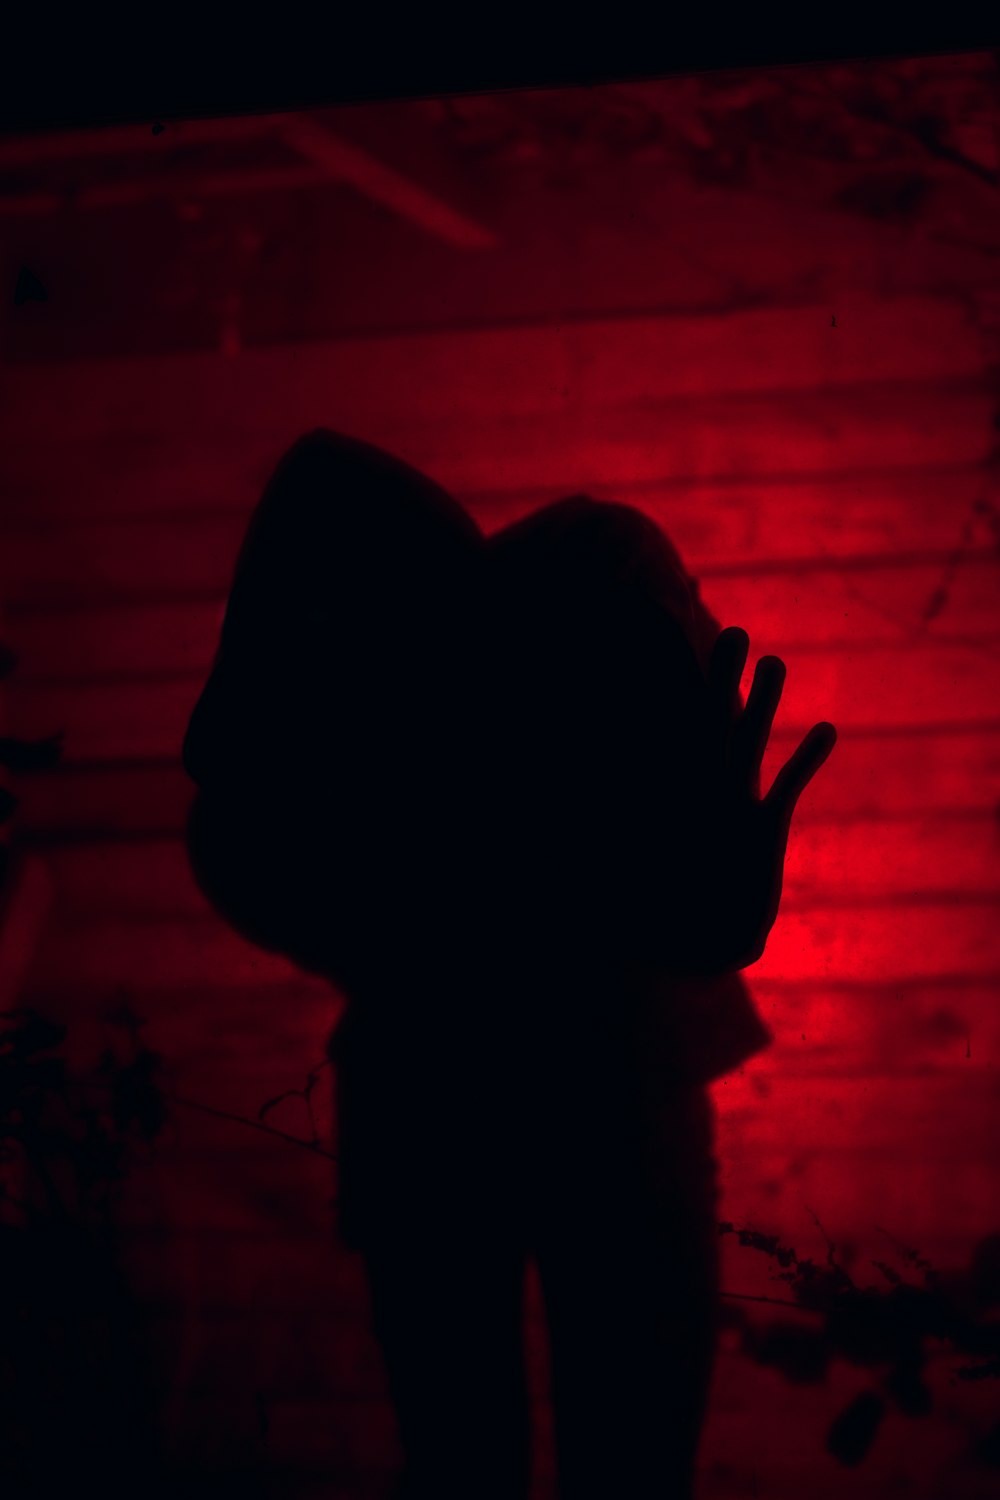 silhouette of persons hand